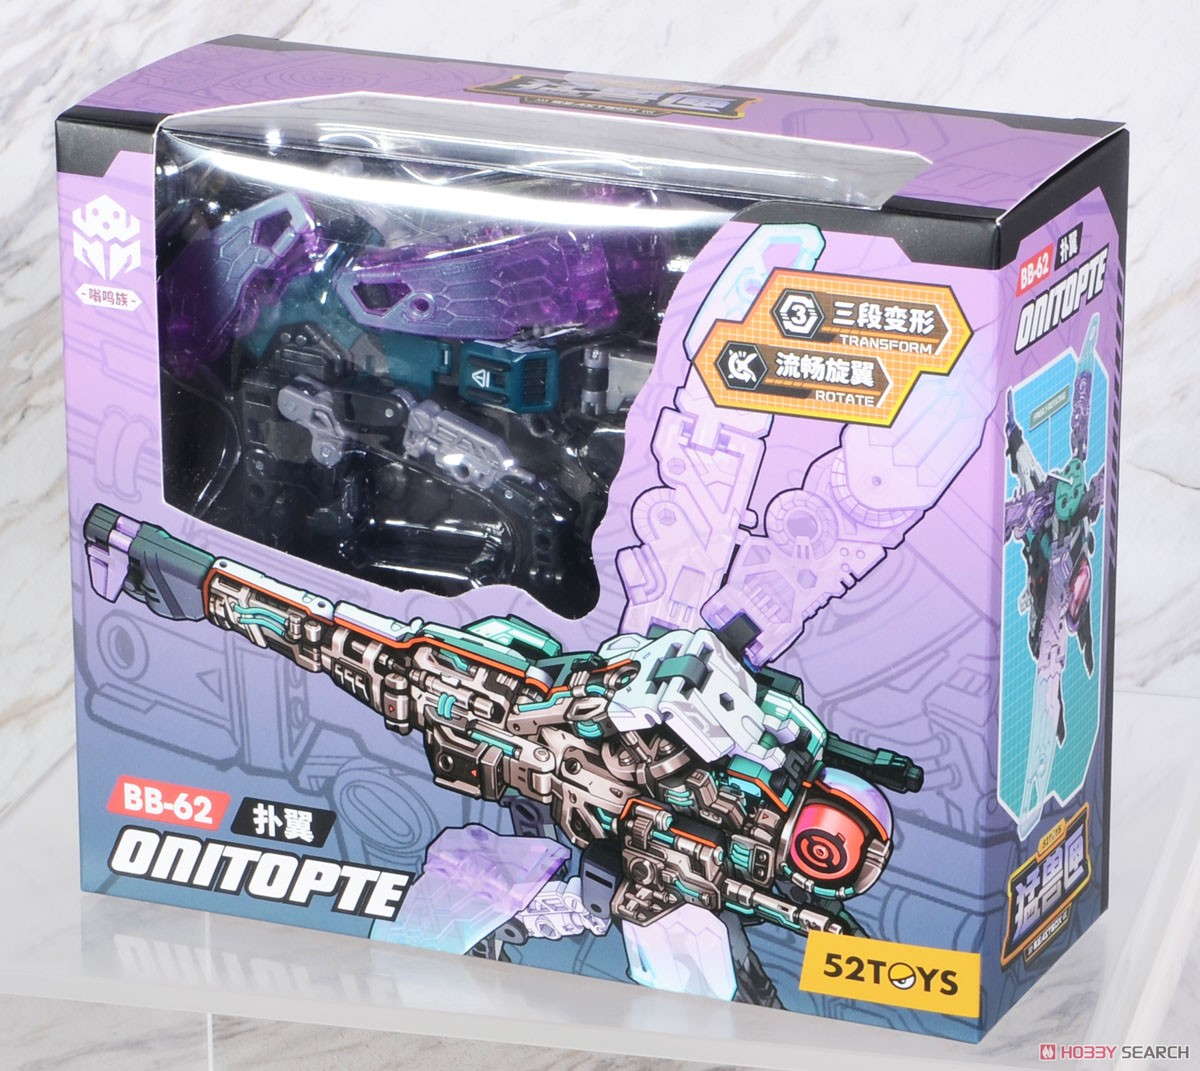 BeastBOX BB-62 Onitopte (Character Toy) Package1